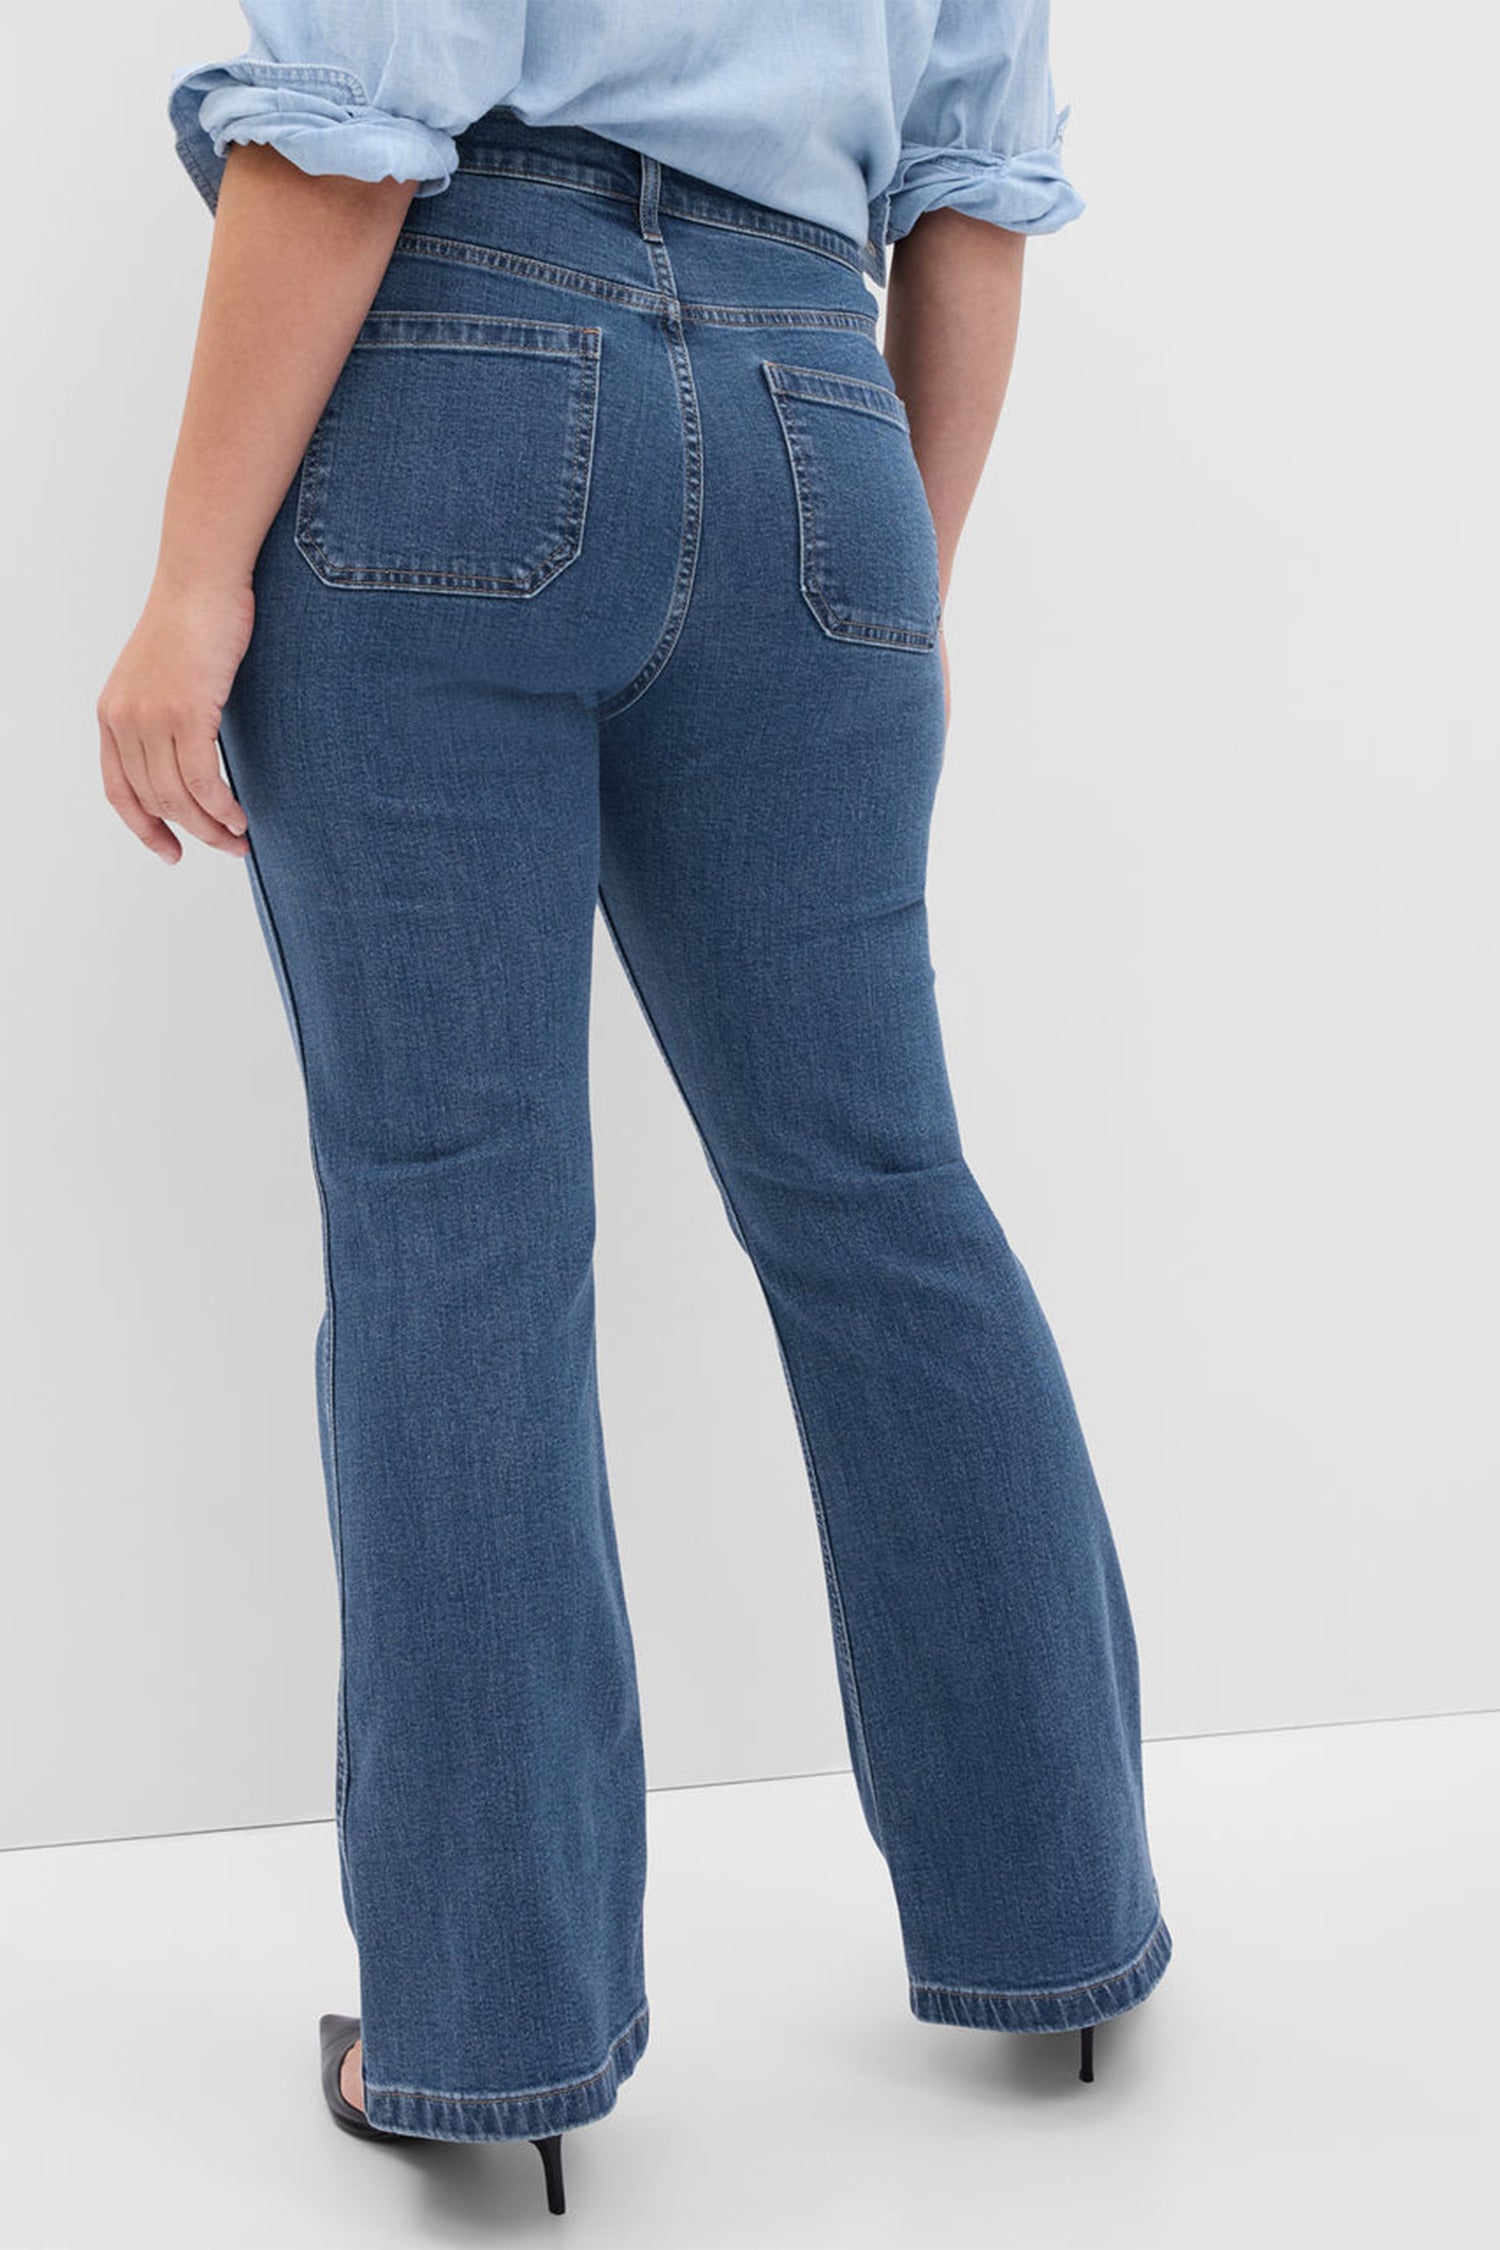 Buy Gap High Waisted Flare Stretch Denim Jeans (4-16yrs) from the Gap  online shop